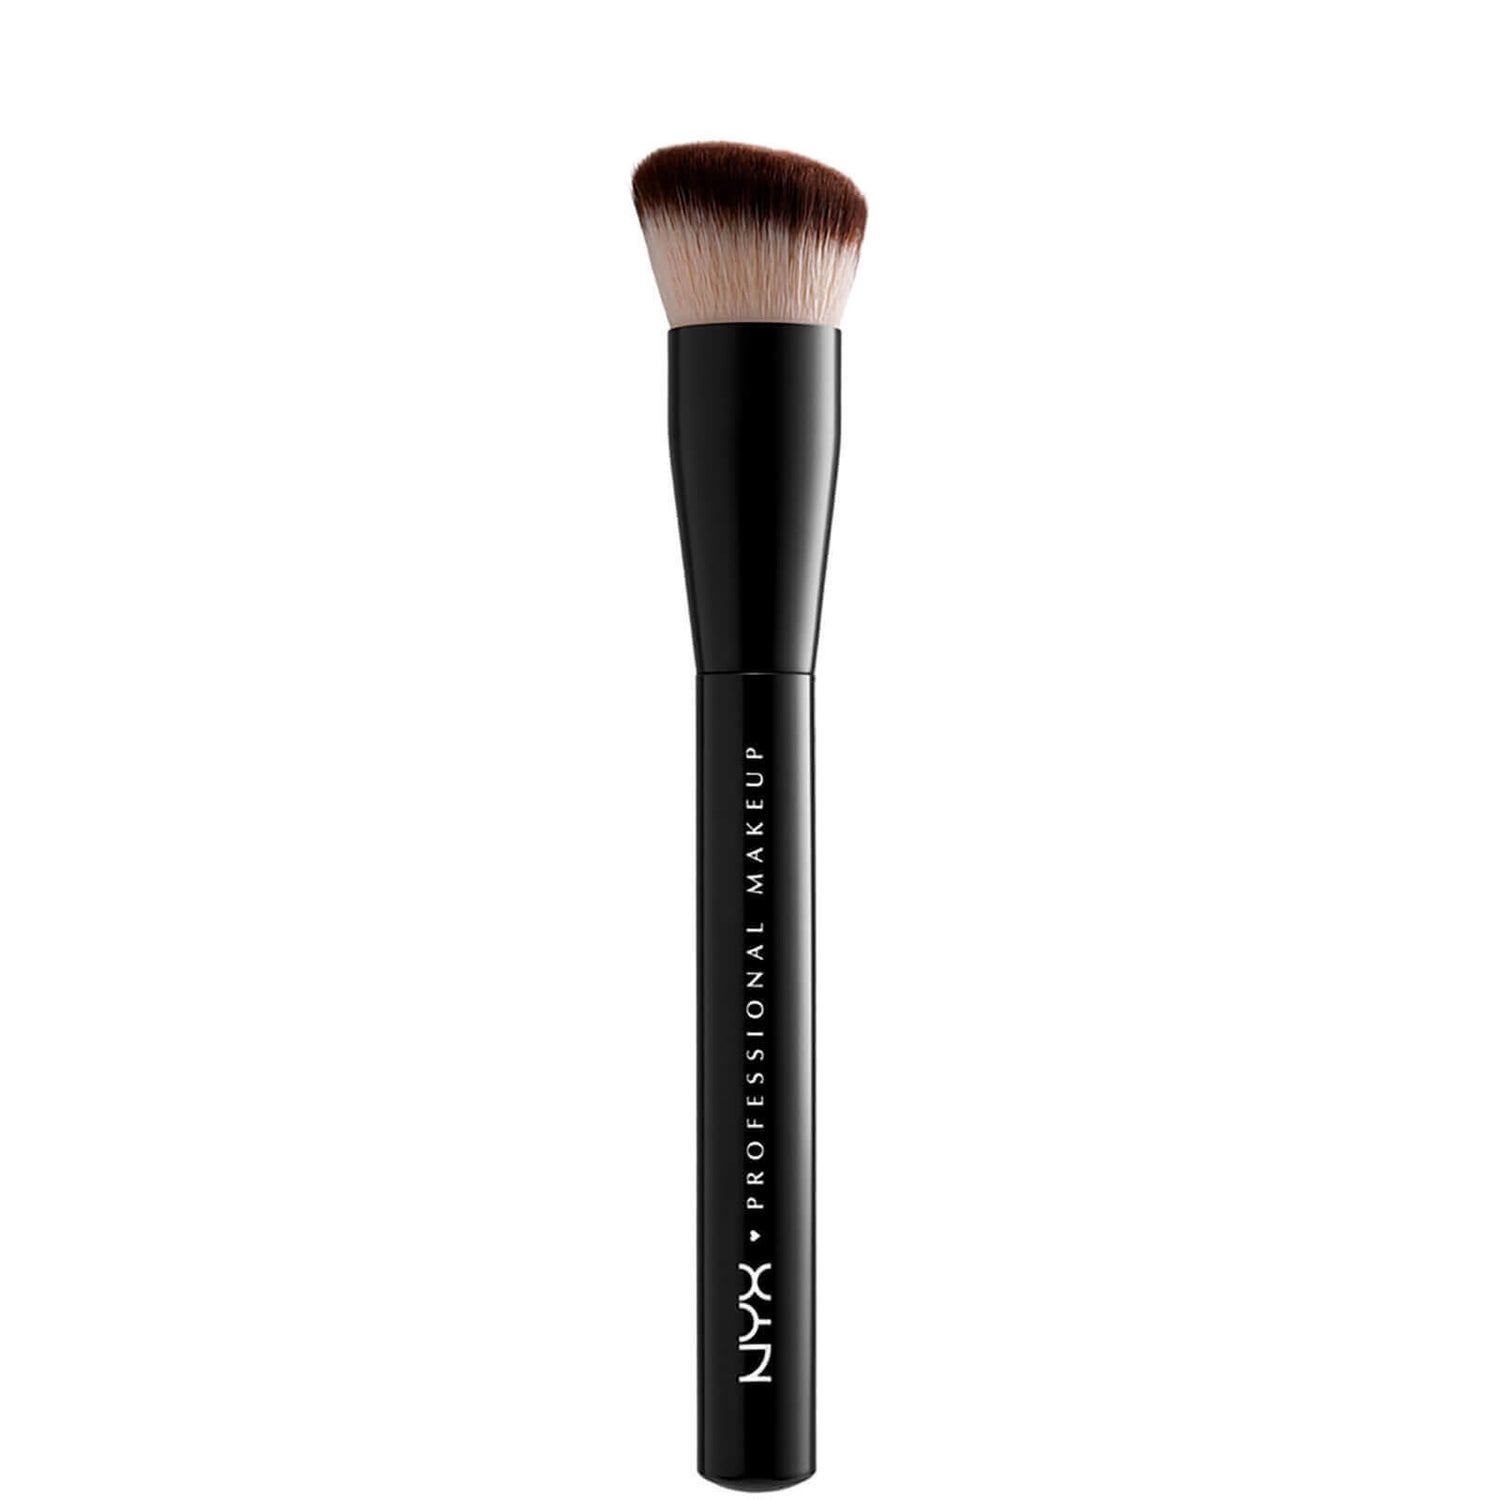 NYX Professional Makeup Can't Stop Won't Stop Foundation Brush Cult Beauty